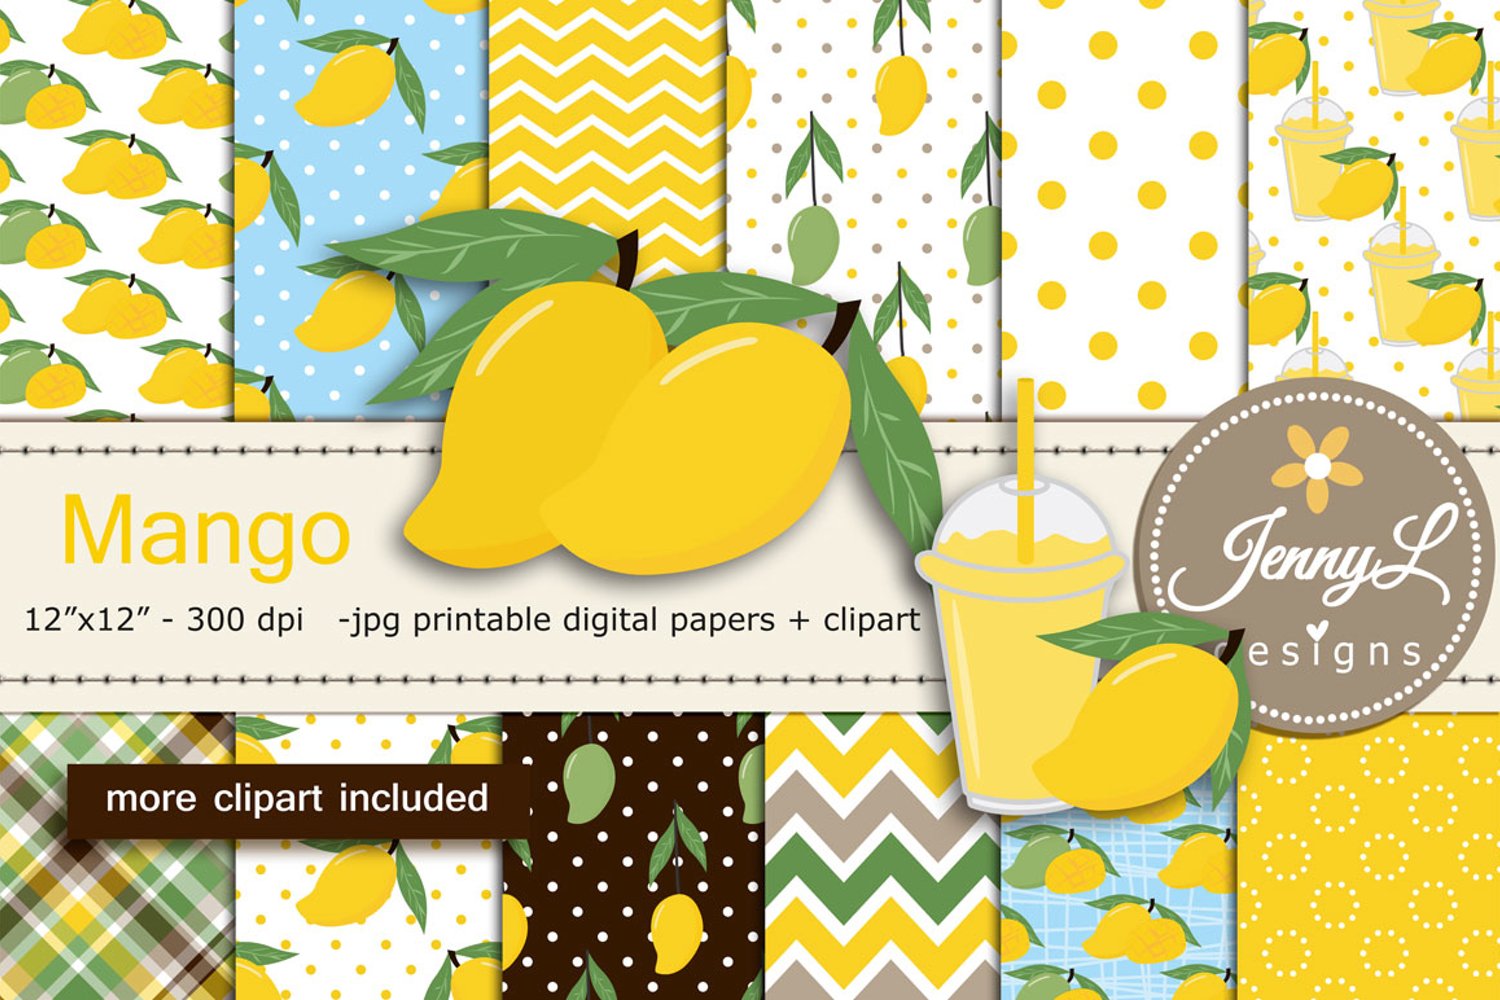 Cover image of Mango Digital Papers and Mango Juice Clipart SET.